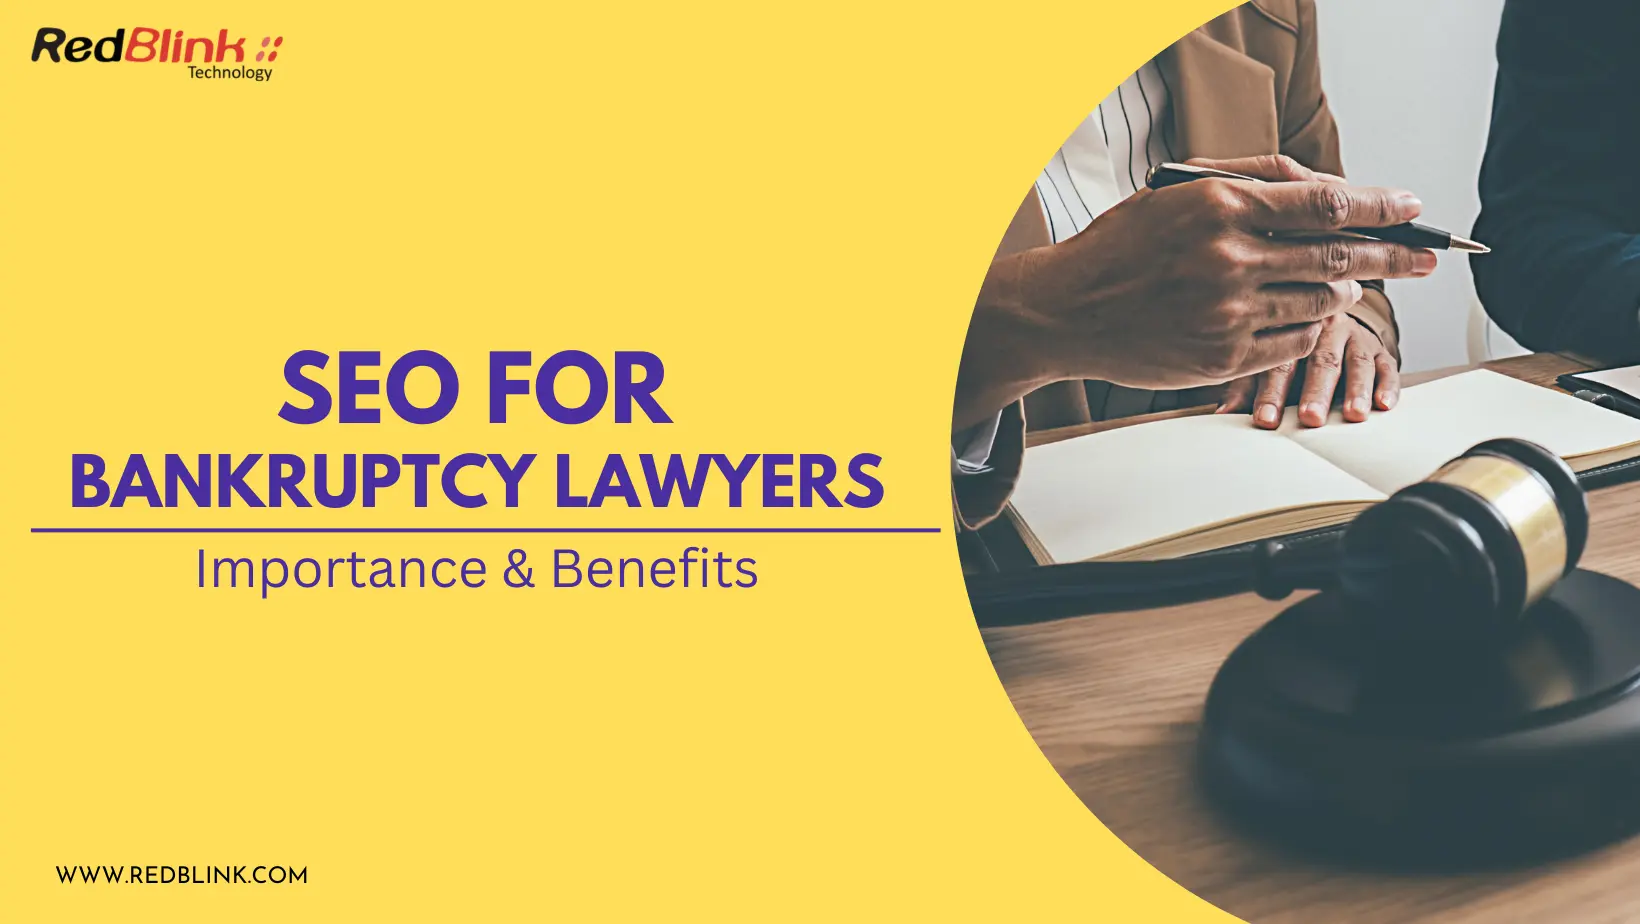 Bankruptcy law firm SEO